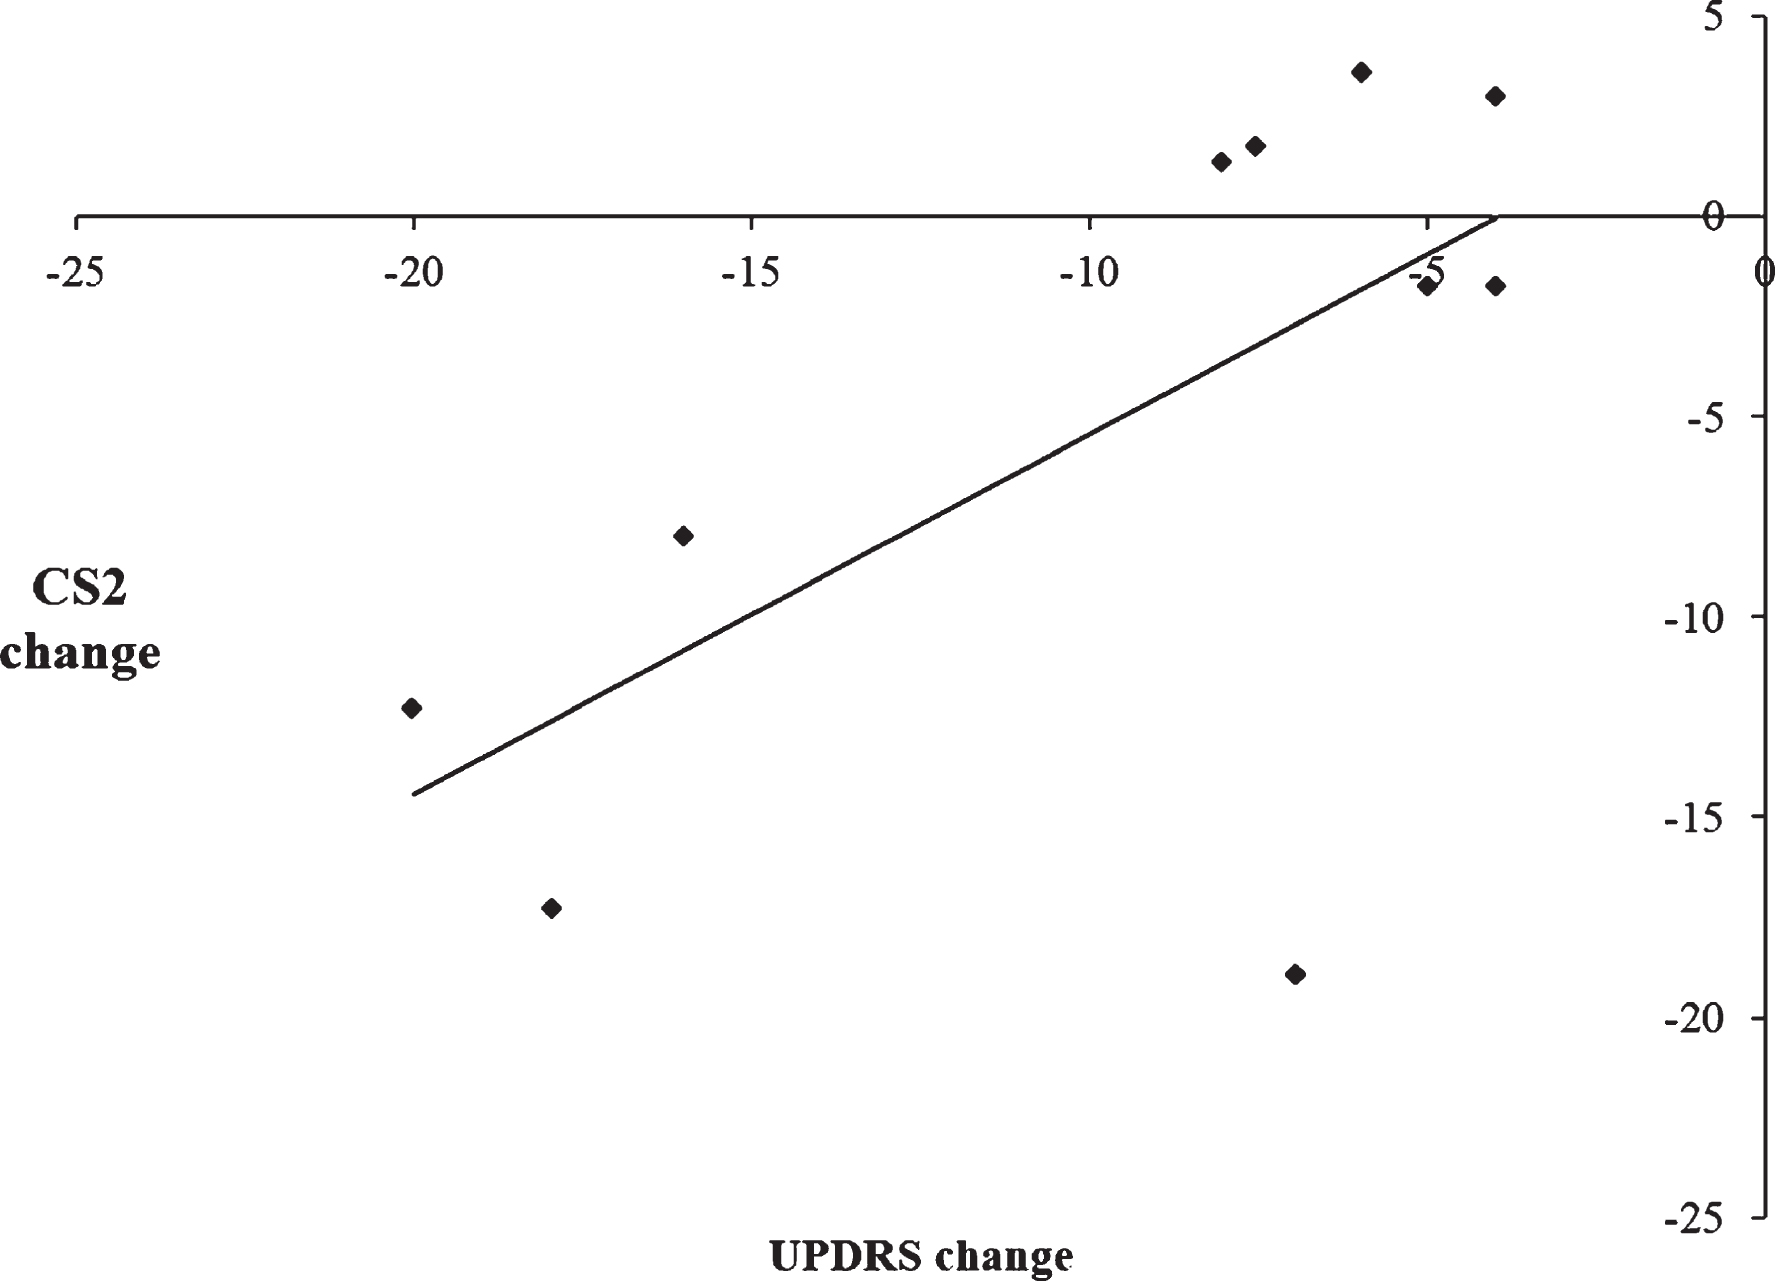 Scatterplot illustrating the positive correlation between the change scores of the Unified Parkinson’s Disease Rating Scale (UPDRS) on versus off stimulation and CS2 change scores with subthalamic nucleus stimulation, indicating that improvement in the motor symptoms was associated with decreased use of CS2 during paced random number generation.